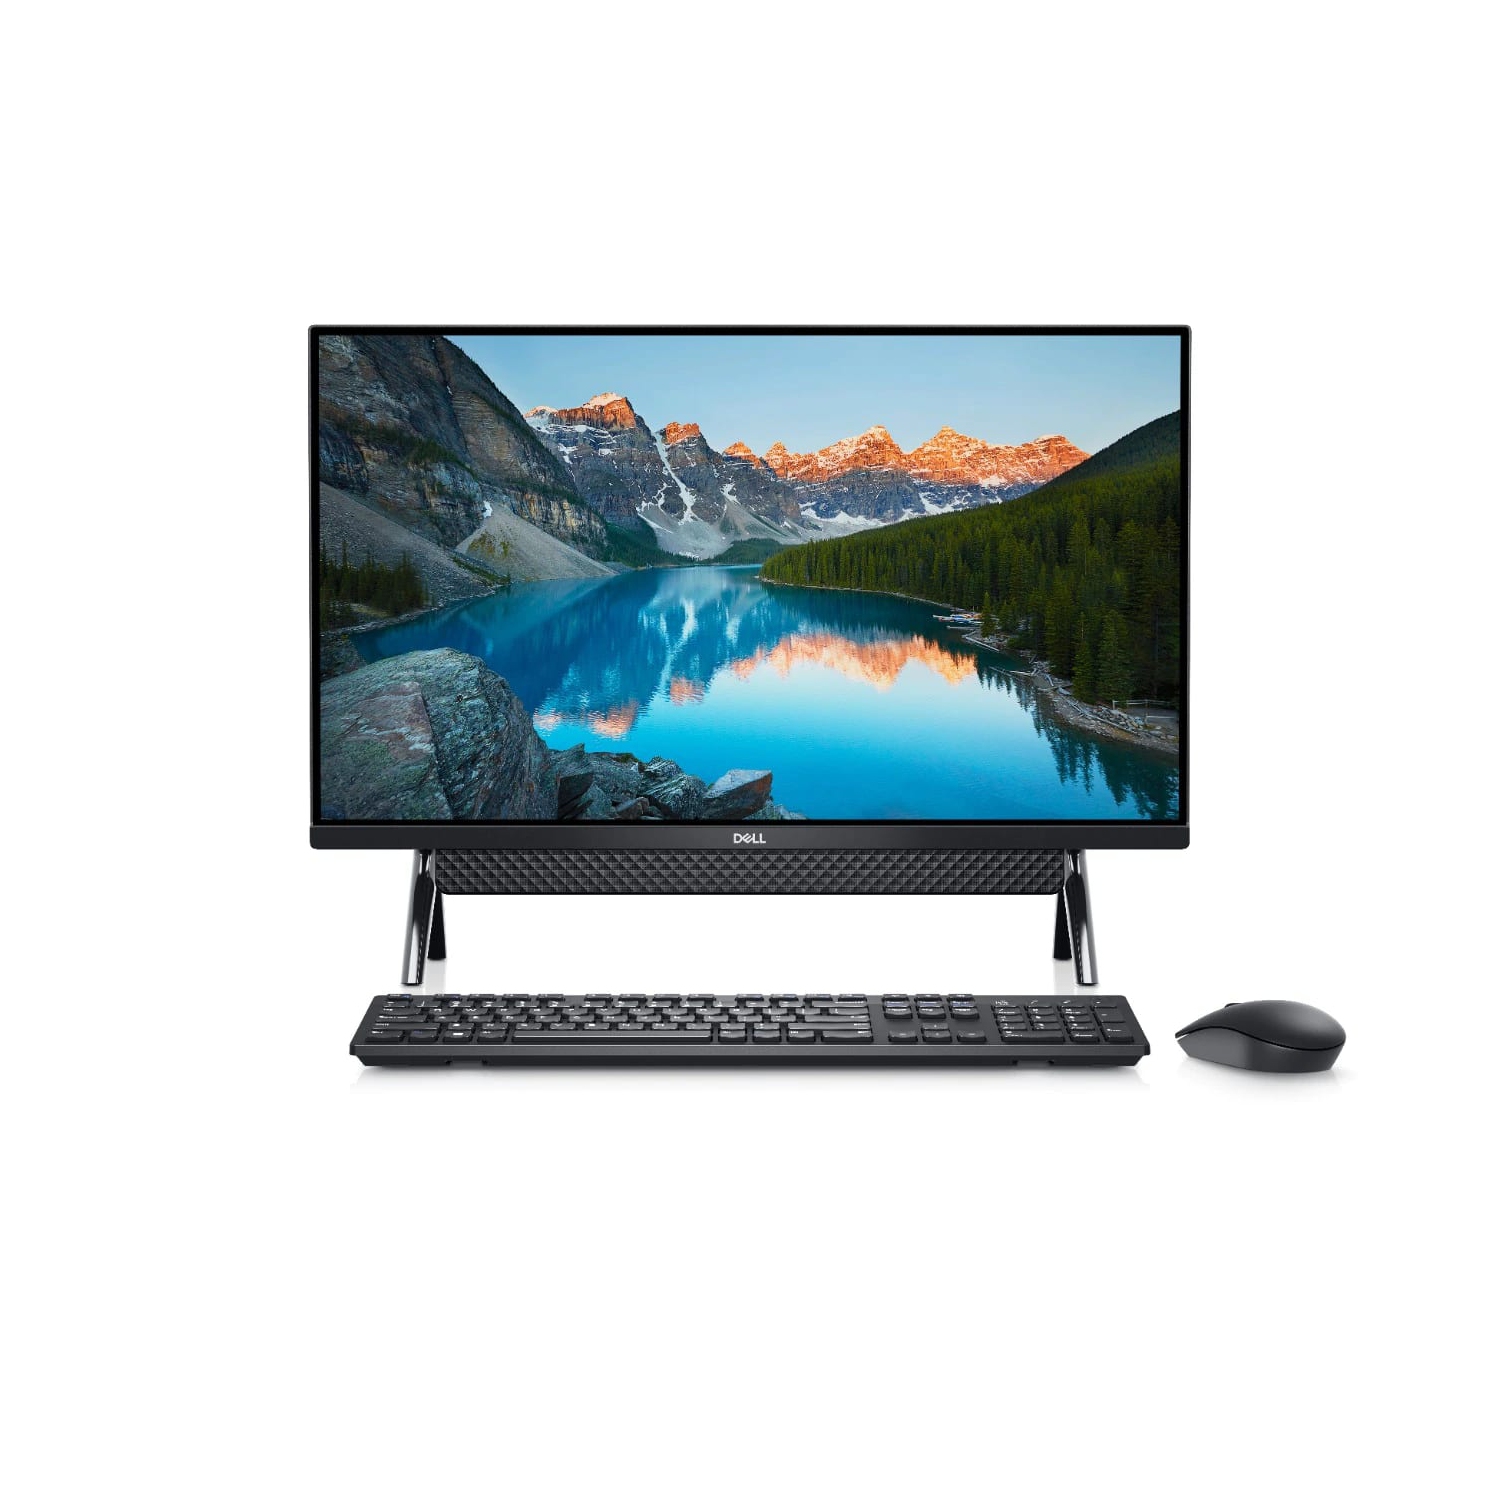 Refurbished (Excellent) – Dell Inspiron 7700 AIO (2020) | 27" FHD | Core i7 - 1TB HDD + 256GB SSD - 12GB RAM | 4 Cores @ 4.7 GHz - 11th Gen CPU